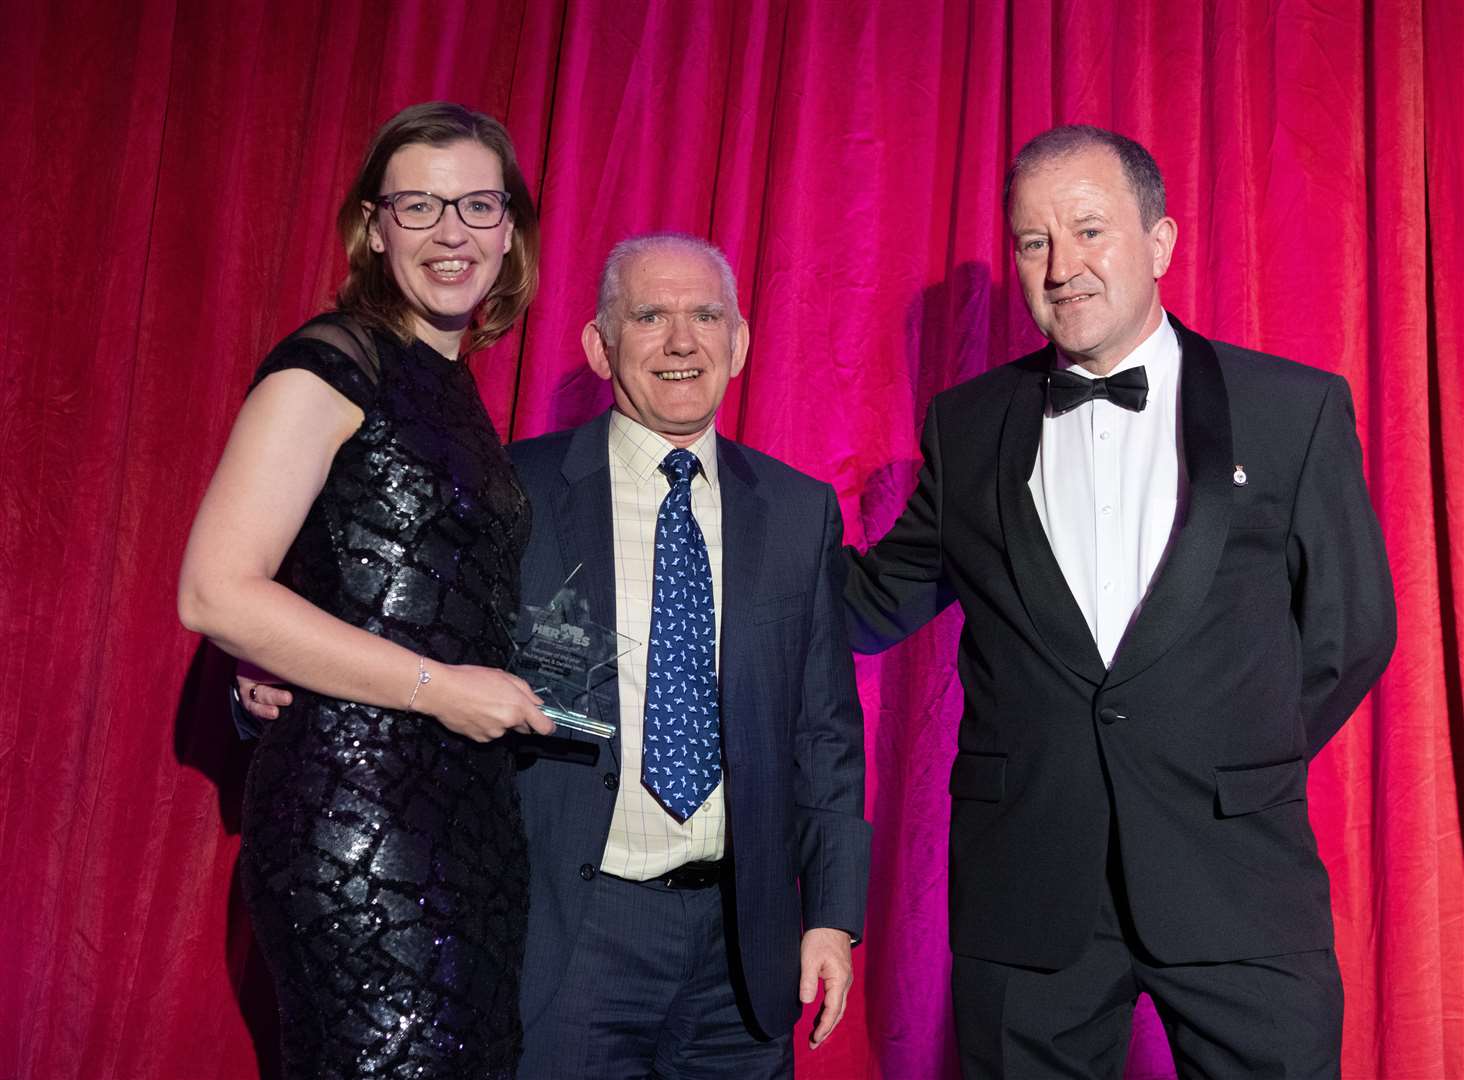 Debbie Main and Paul Hughes were awarded Volunteer of the Year Award presented by Frank Reid, Managing Director for Robertson...Moray and Banffshire Heroes Awards 2023, Brodie Countryfare...Picture: Beth Taylor.